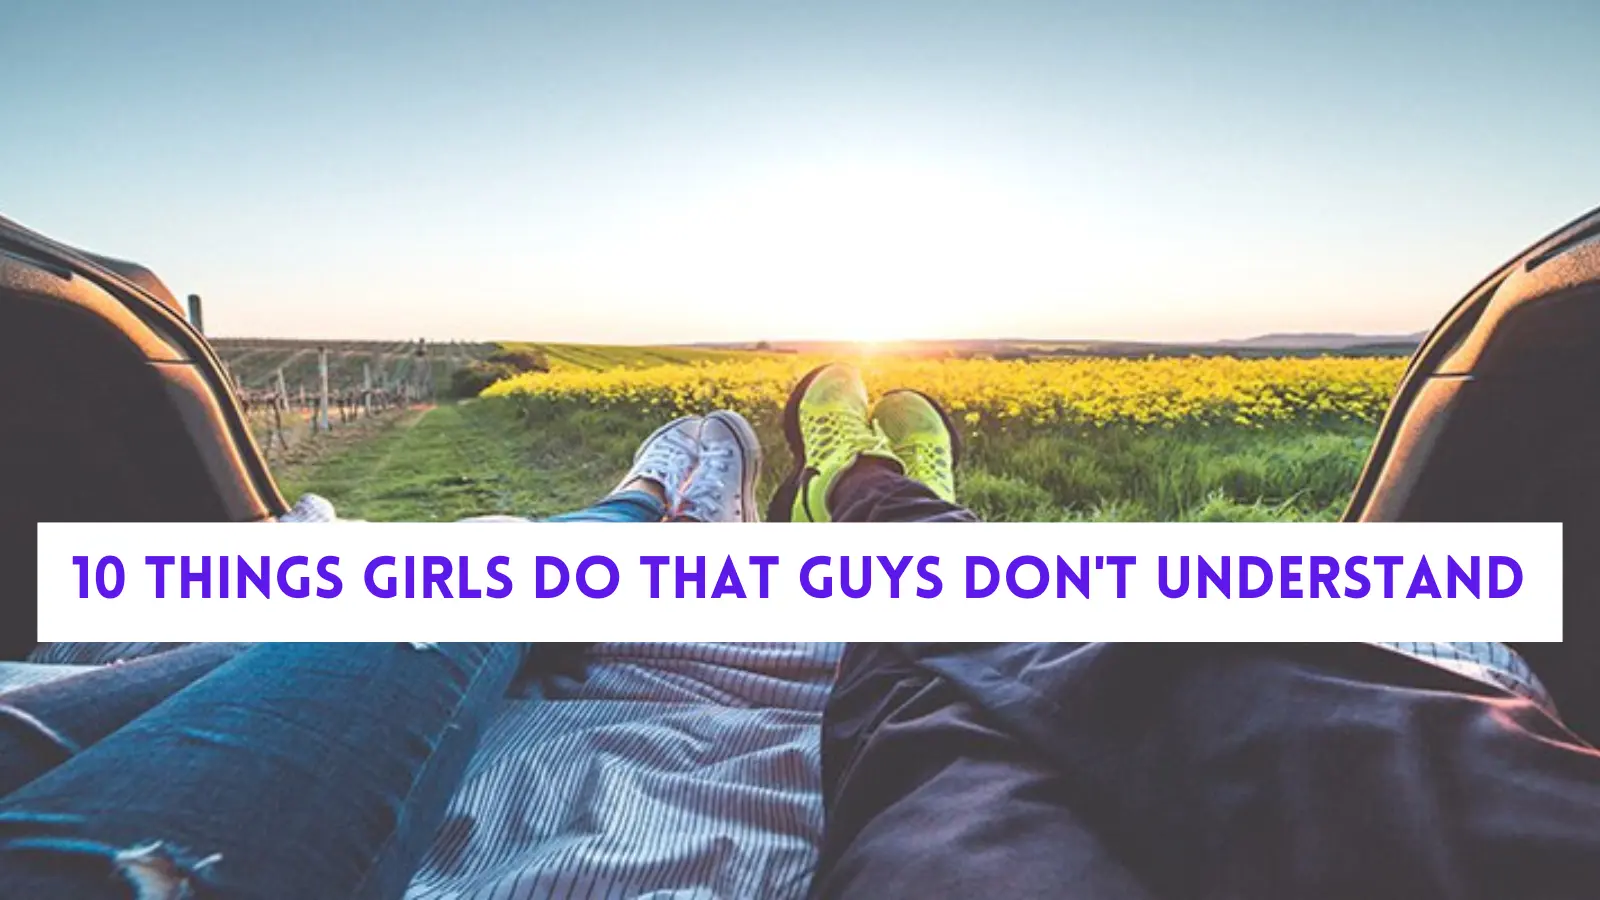 10 Things Girls Do That guys Don't Understand